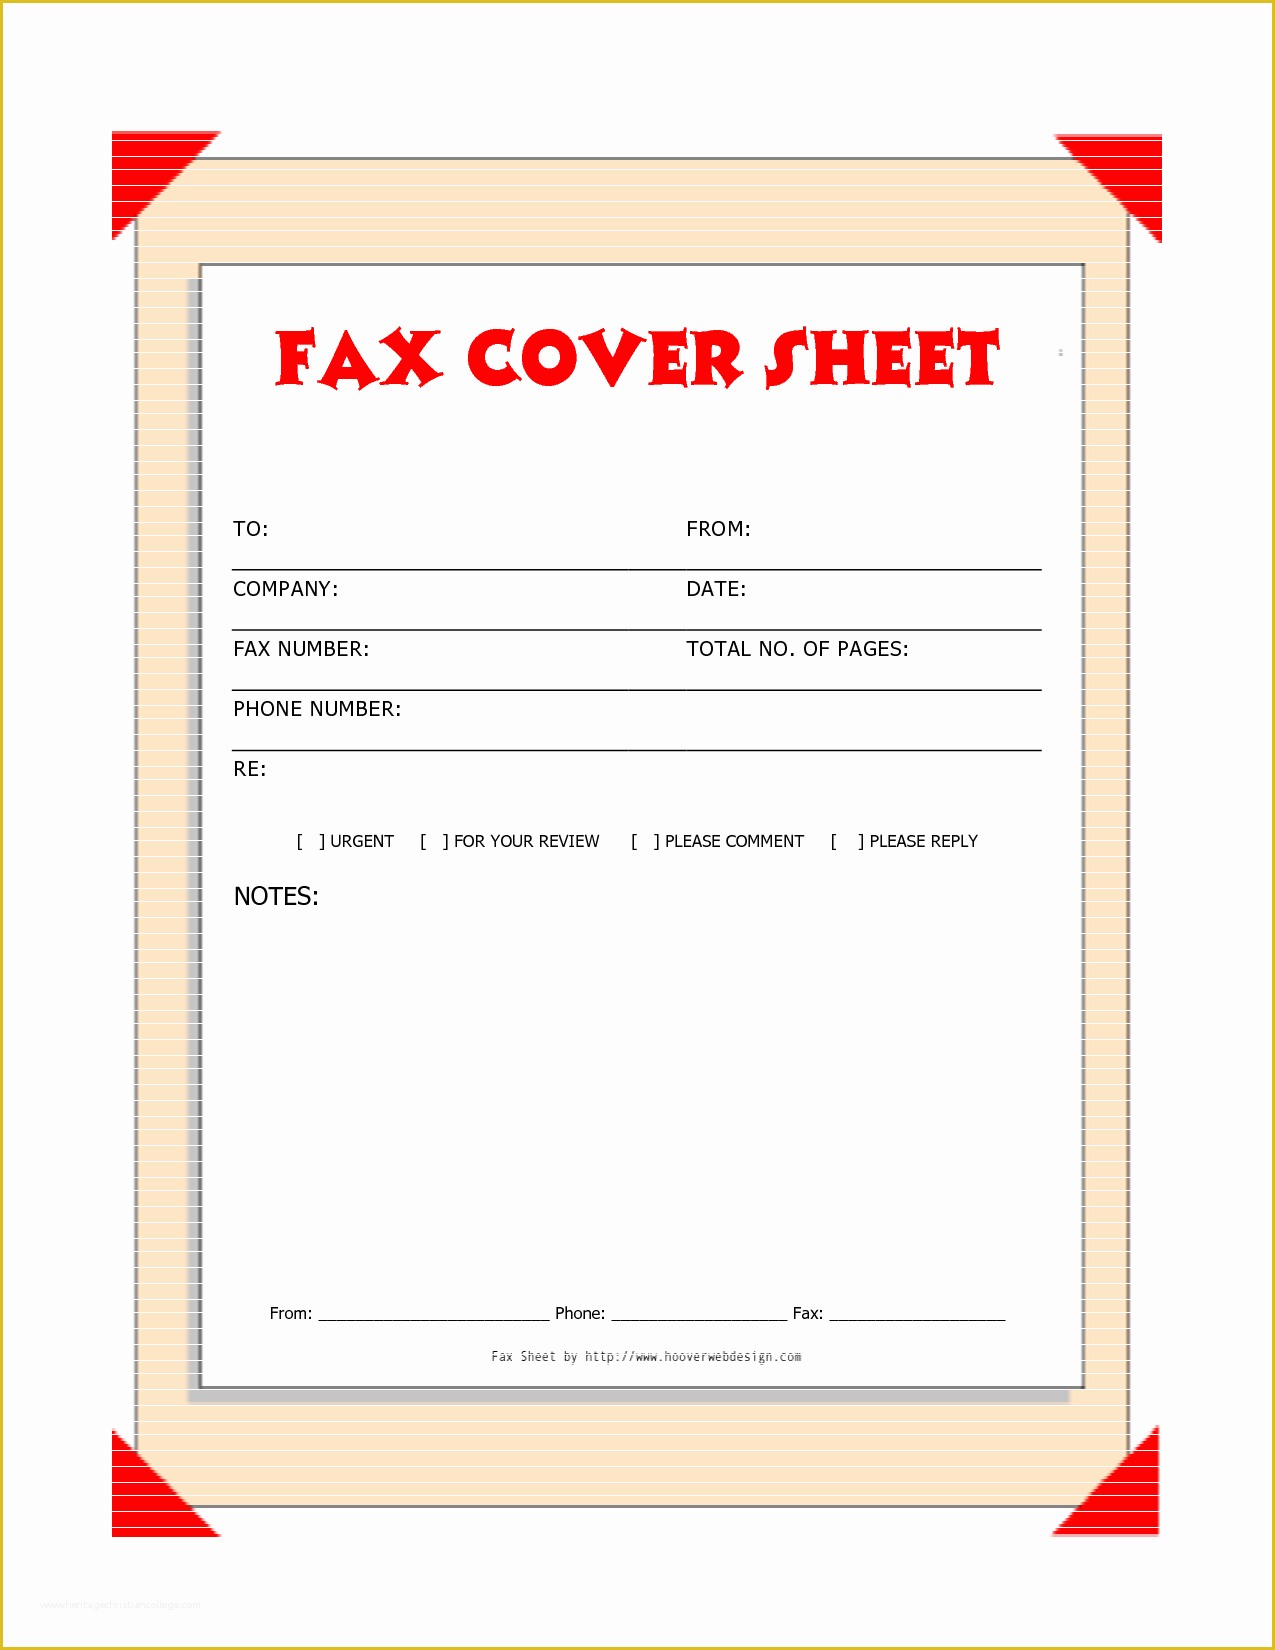 Free Cover Page Templates Of Free Downloads Fax Covers Sheets